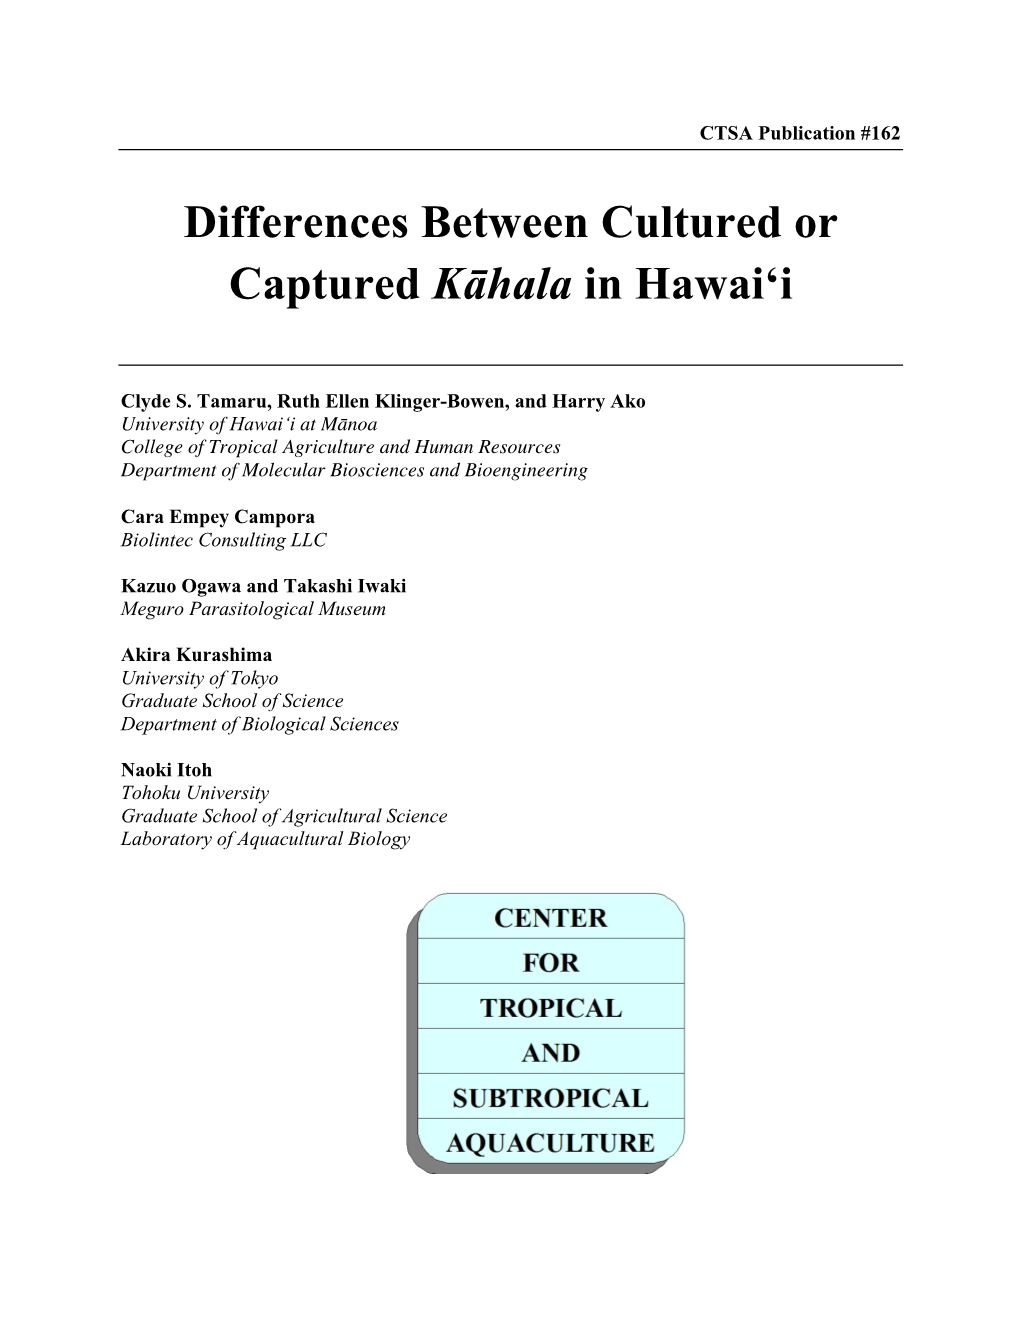 Differences Between Cultured Or Captured Kāhala in Hawai'i